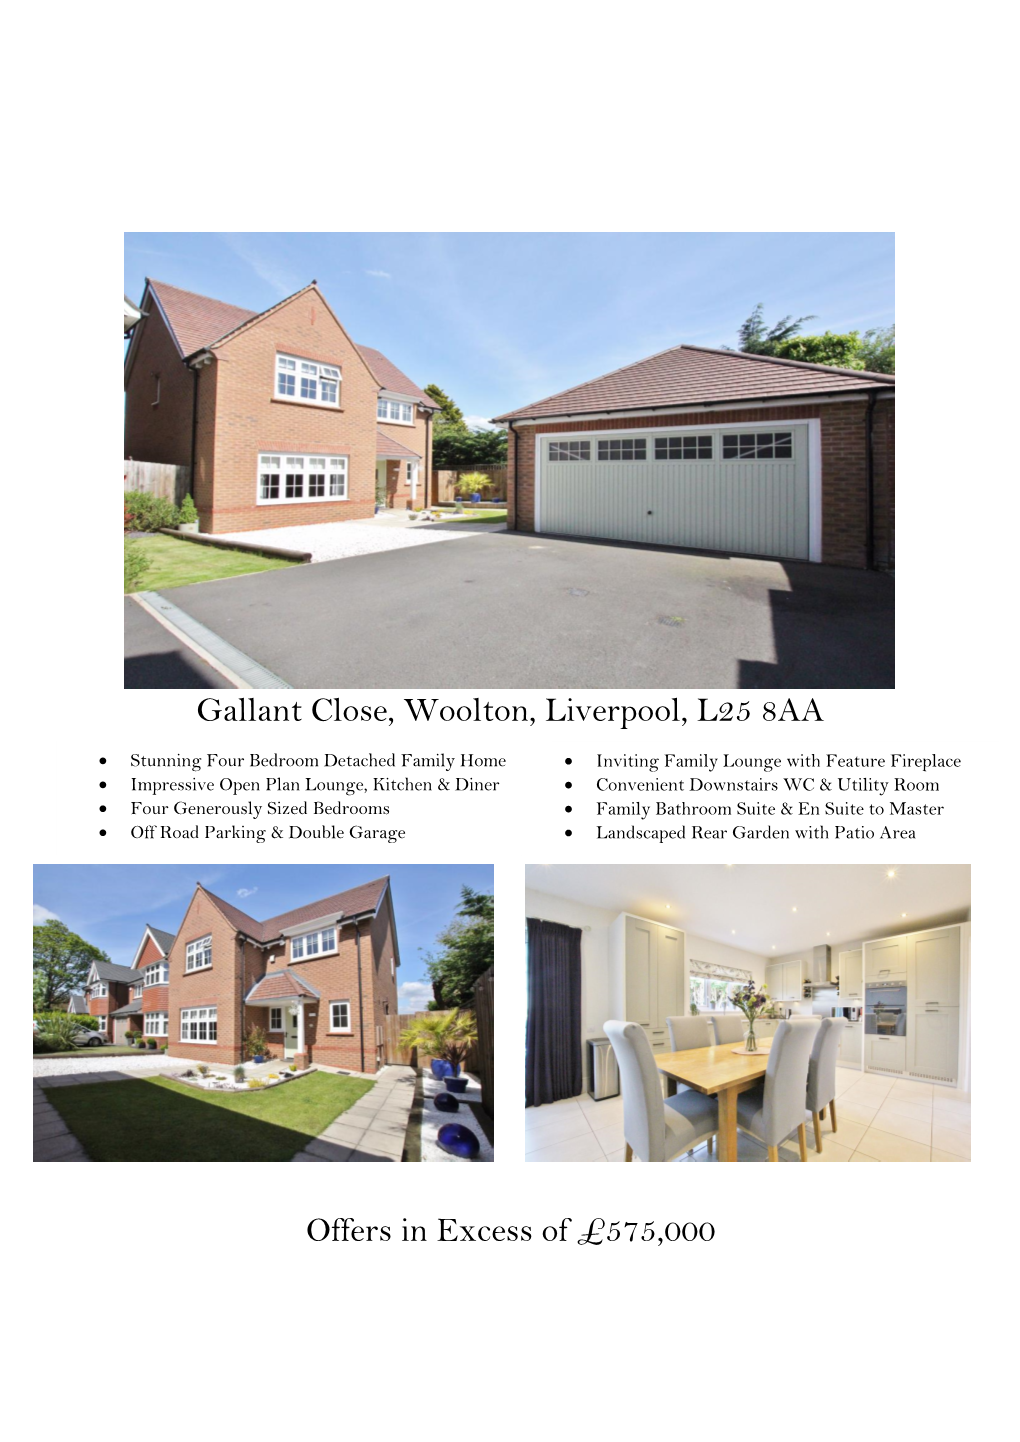 Gallant Close, Woolton, Liverpool, L25 8AA Offers in Excess of £575,000